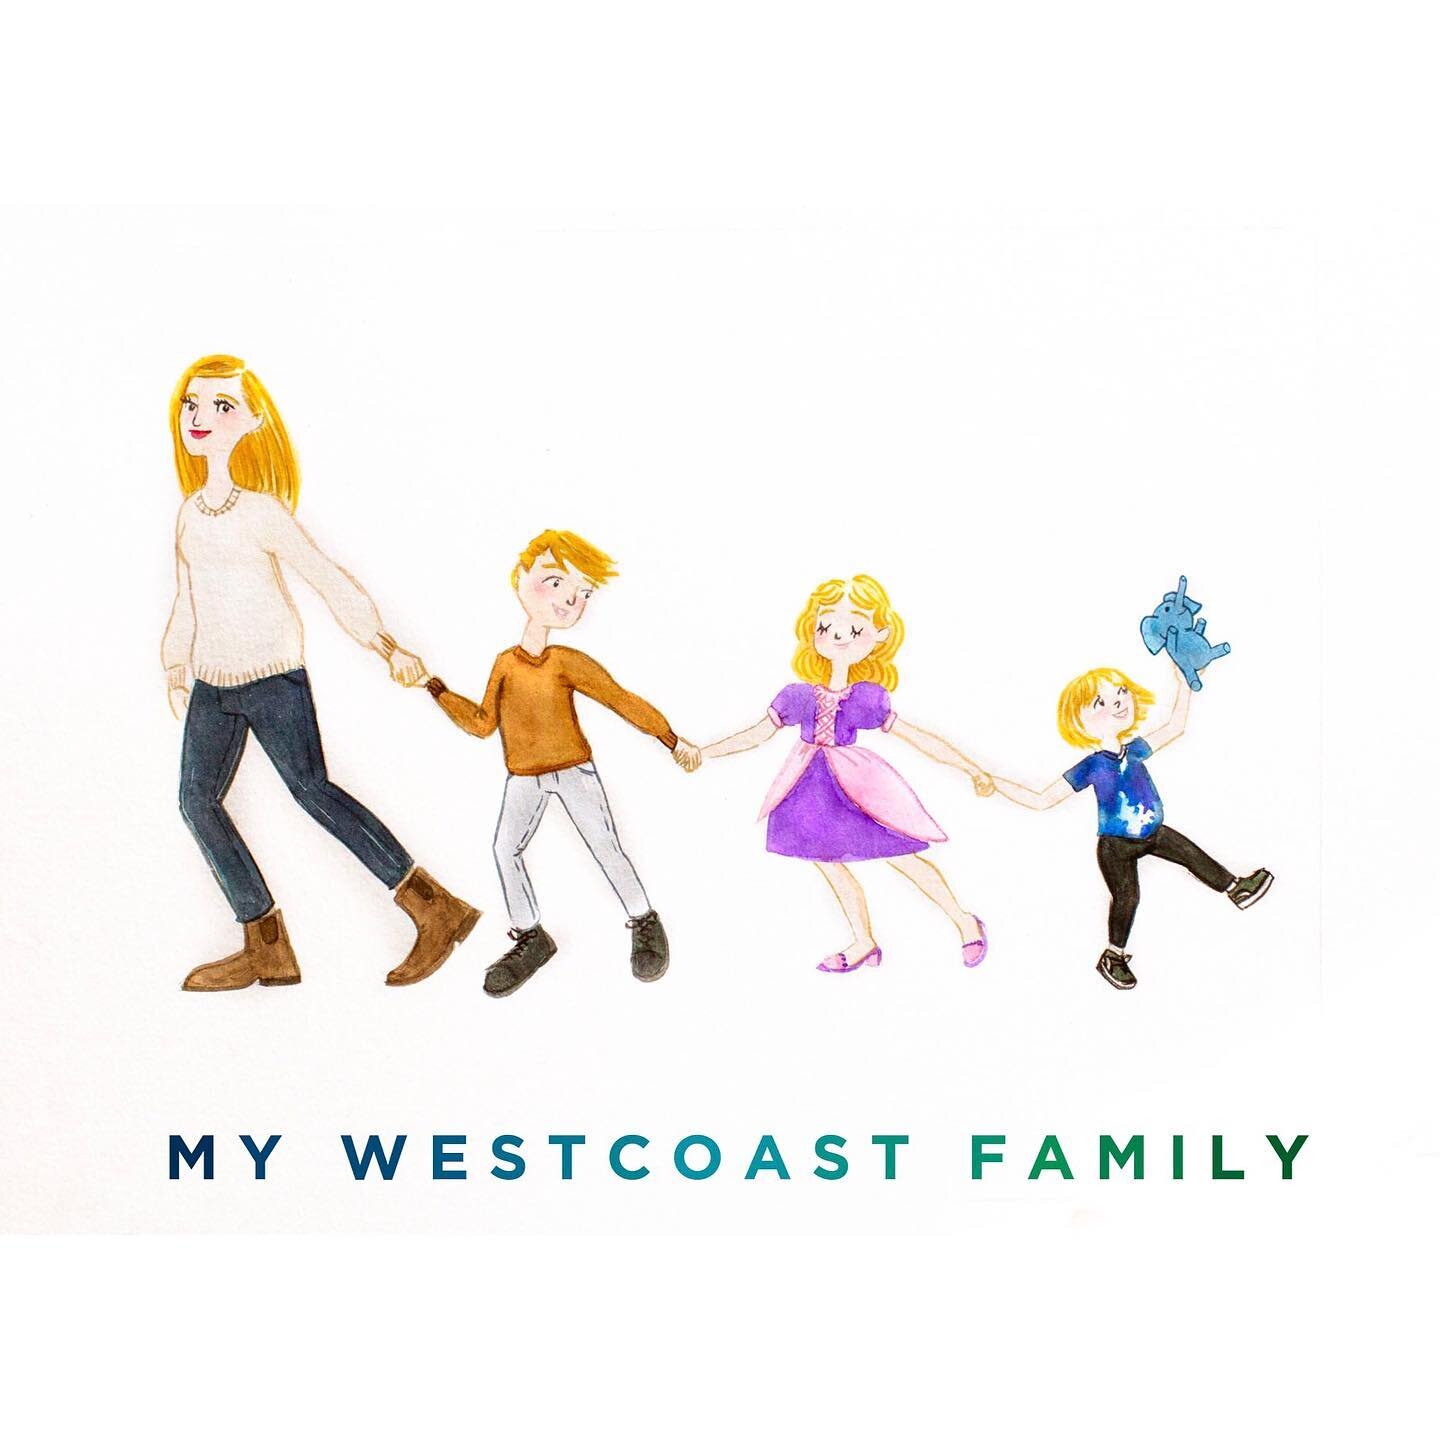 WEST COAST✌️BEST COAST
An illustration update for a fun-loving woman + mother who is as inspiring as she is kind 💙
After 6 years raising and sharing her growing family in Toronto, @emilycordonier has returned to the beautiful West Coast!